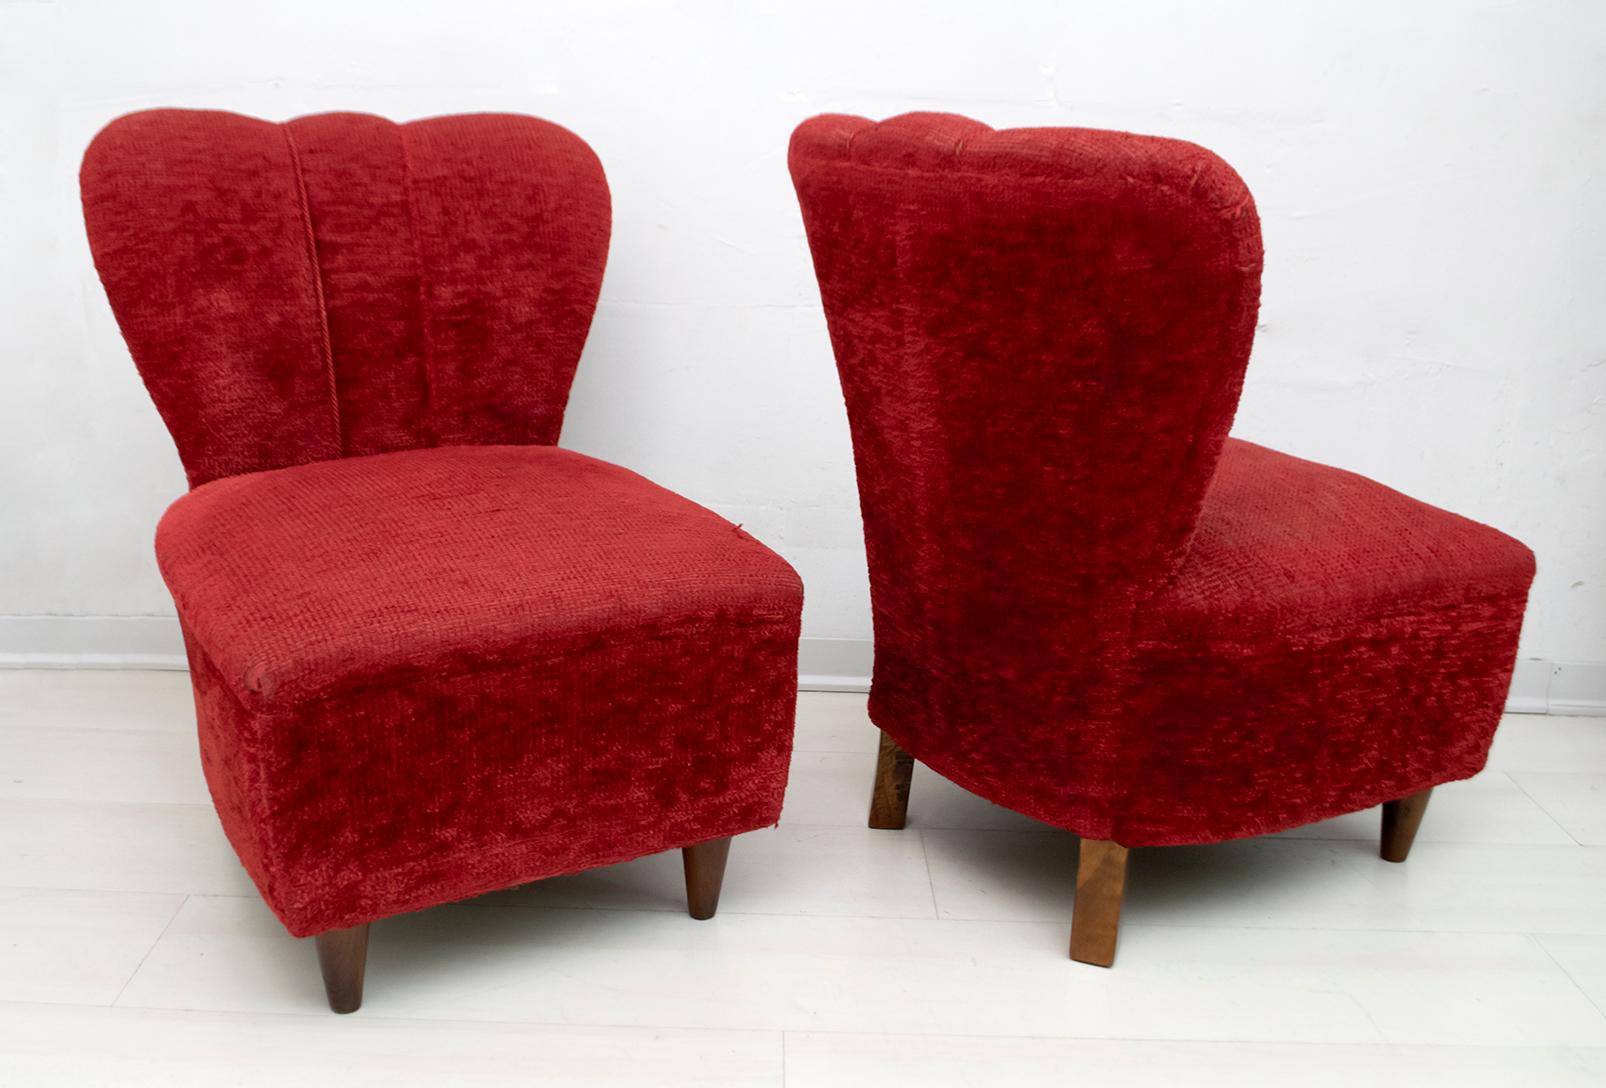 Particular pair of small armchairs attributed to the famous architect Guglielmo Ulrich, the upholstery is original from the time but replacement is recommended. Production from the 1940s in Art Deco style.

 